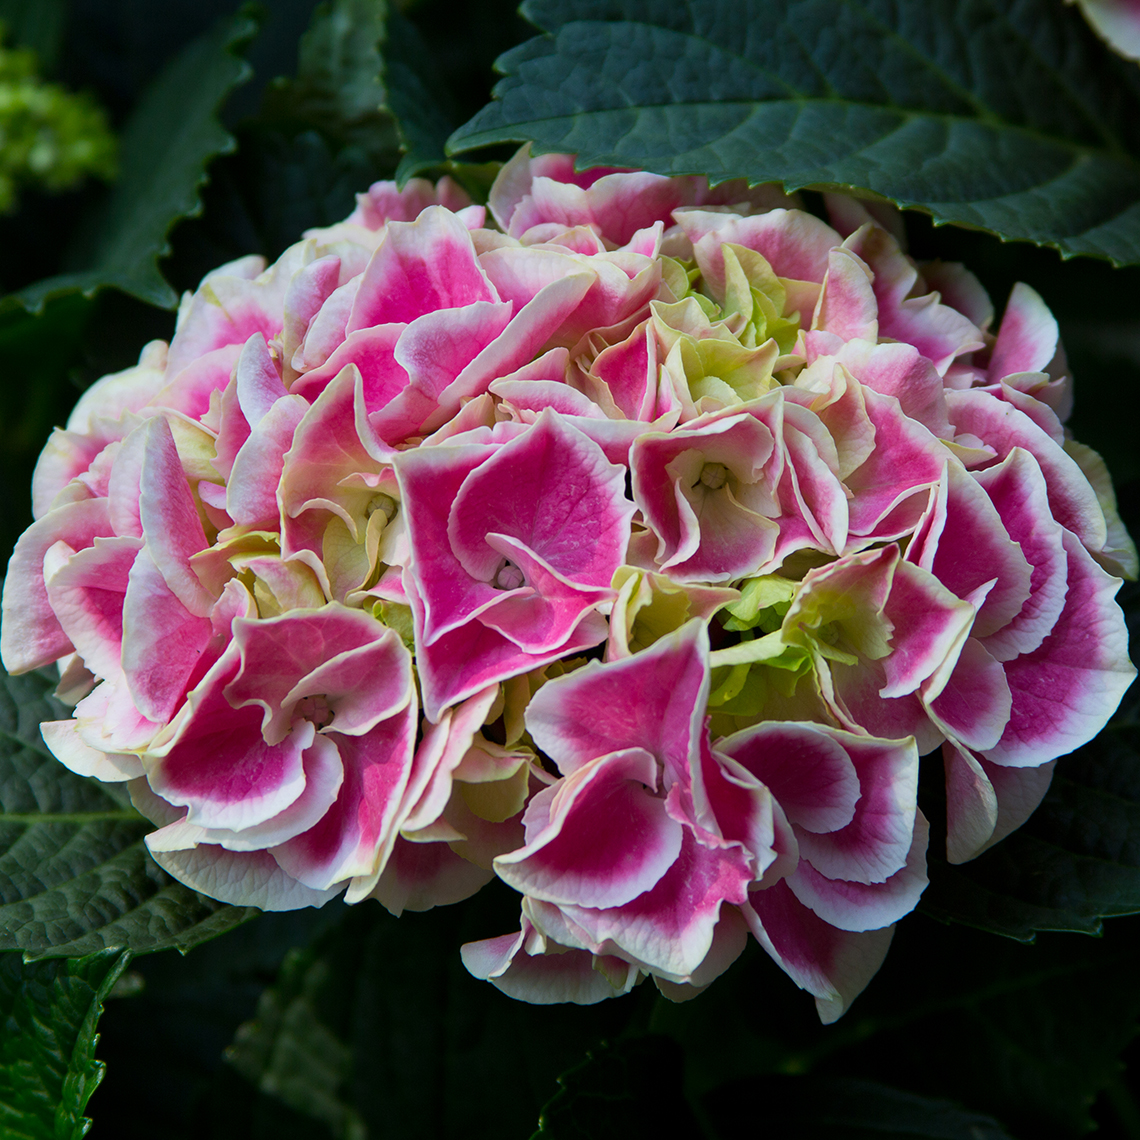 Closeup of the large mophead bloom of Edgy Hearts bigleaf hydrangea with each floret bearing a heart shaped pink marking surrounded by a white margin